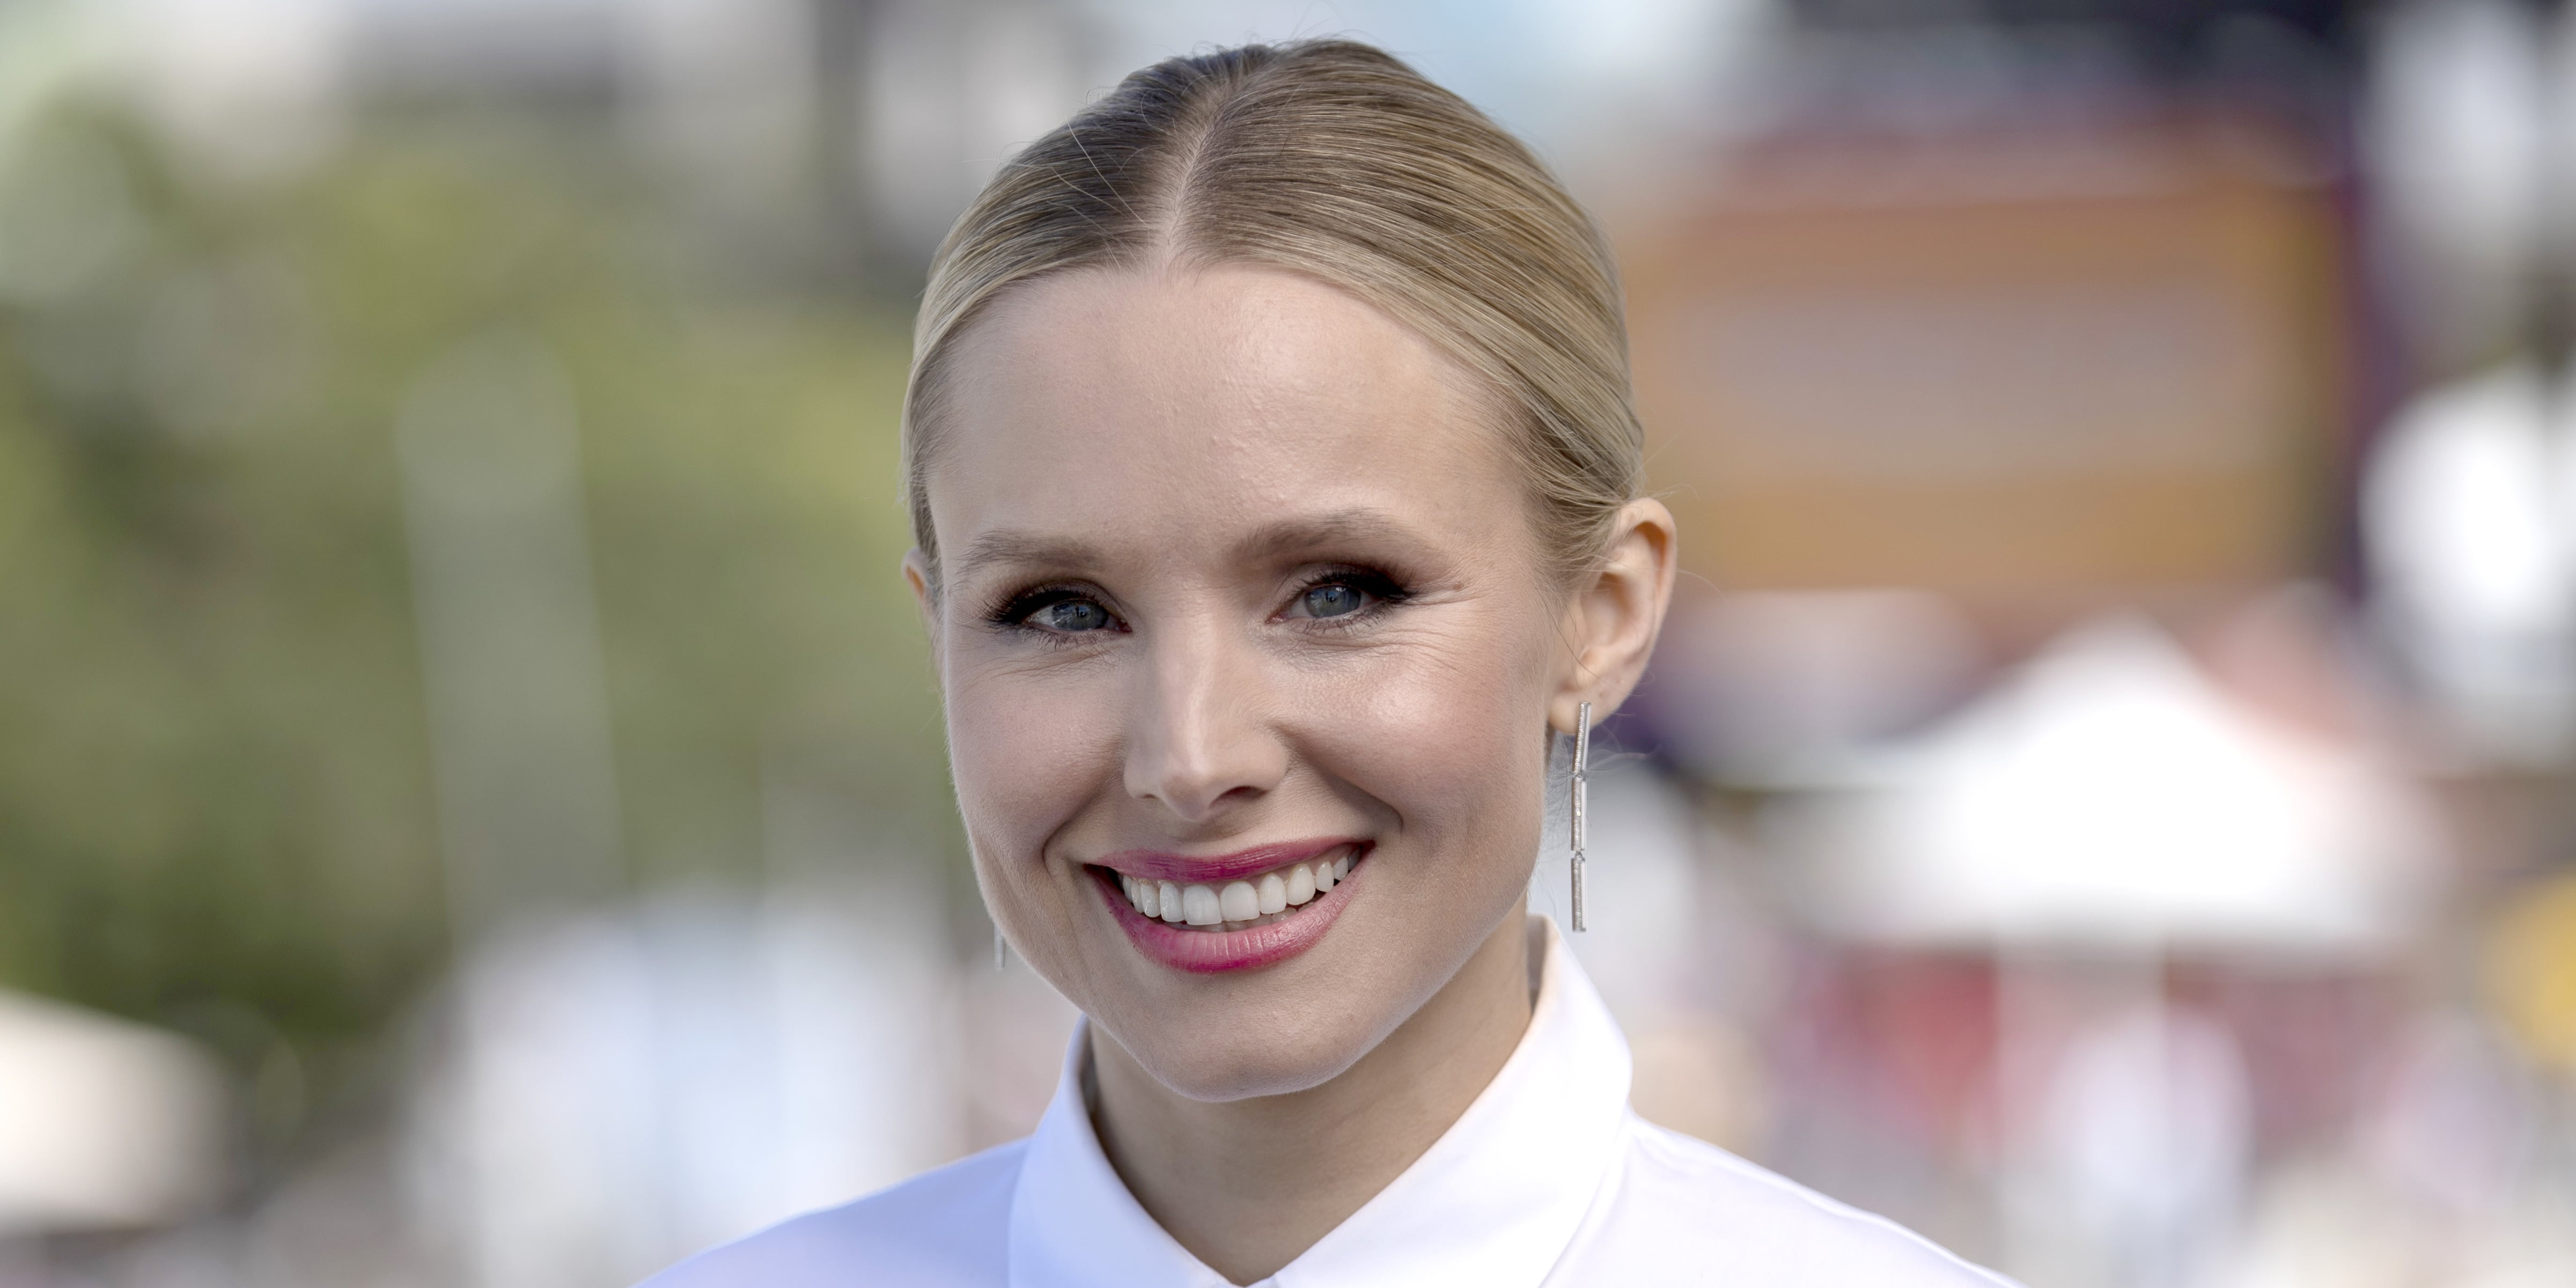 Is Kristen Bell the Most-Tattooed Actress?